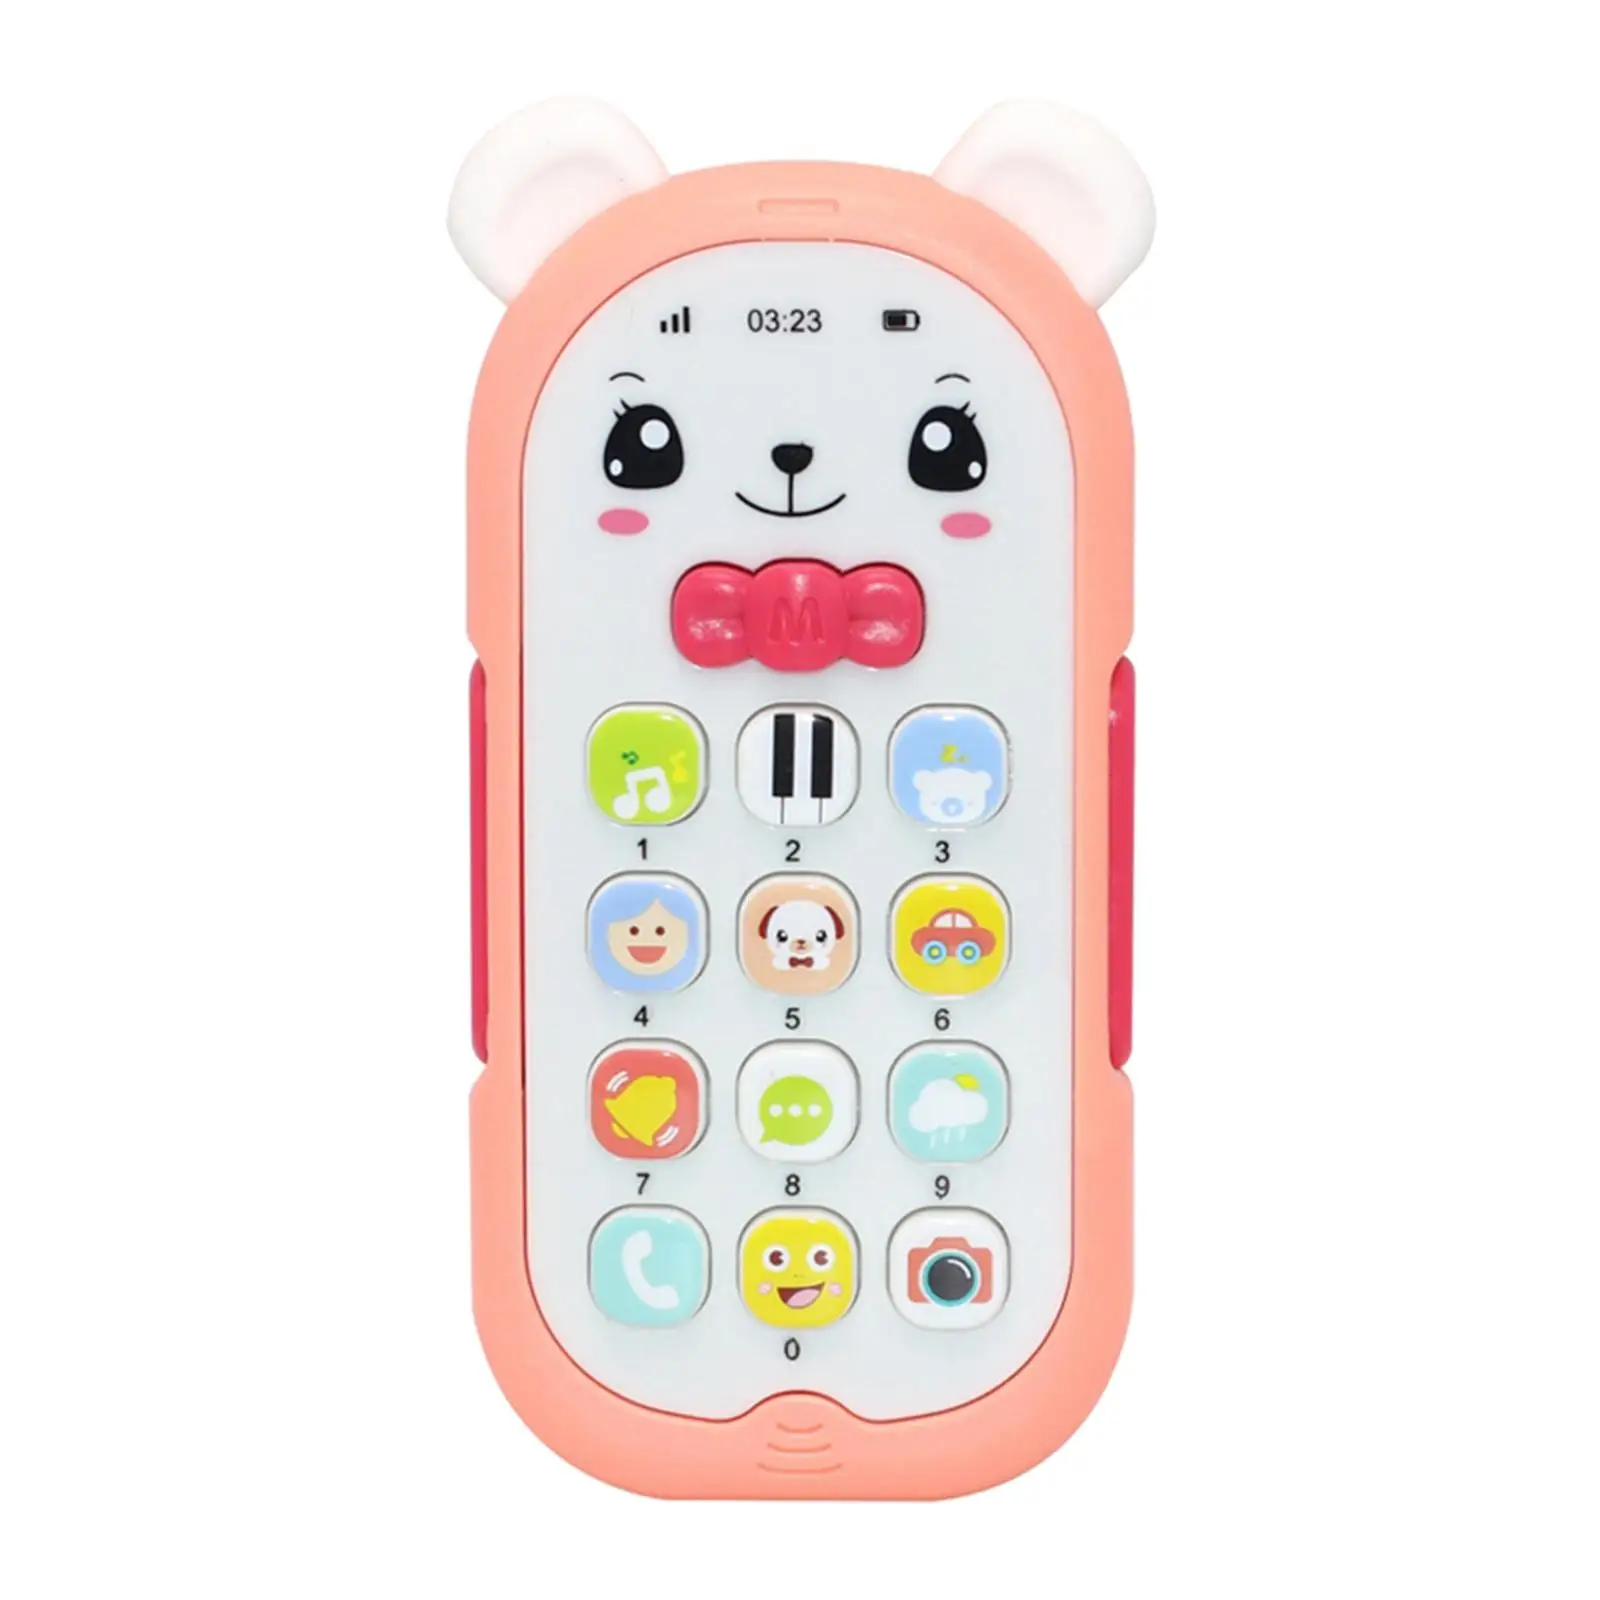  Toys Early Educational Mobile phone Toys Boys Girls Learning Gift Pretend  2 Year Old with Sound and  Click